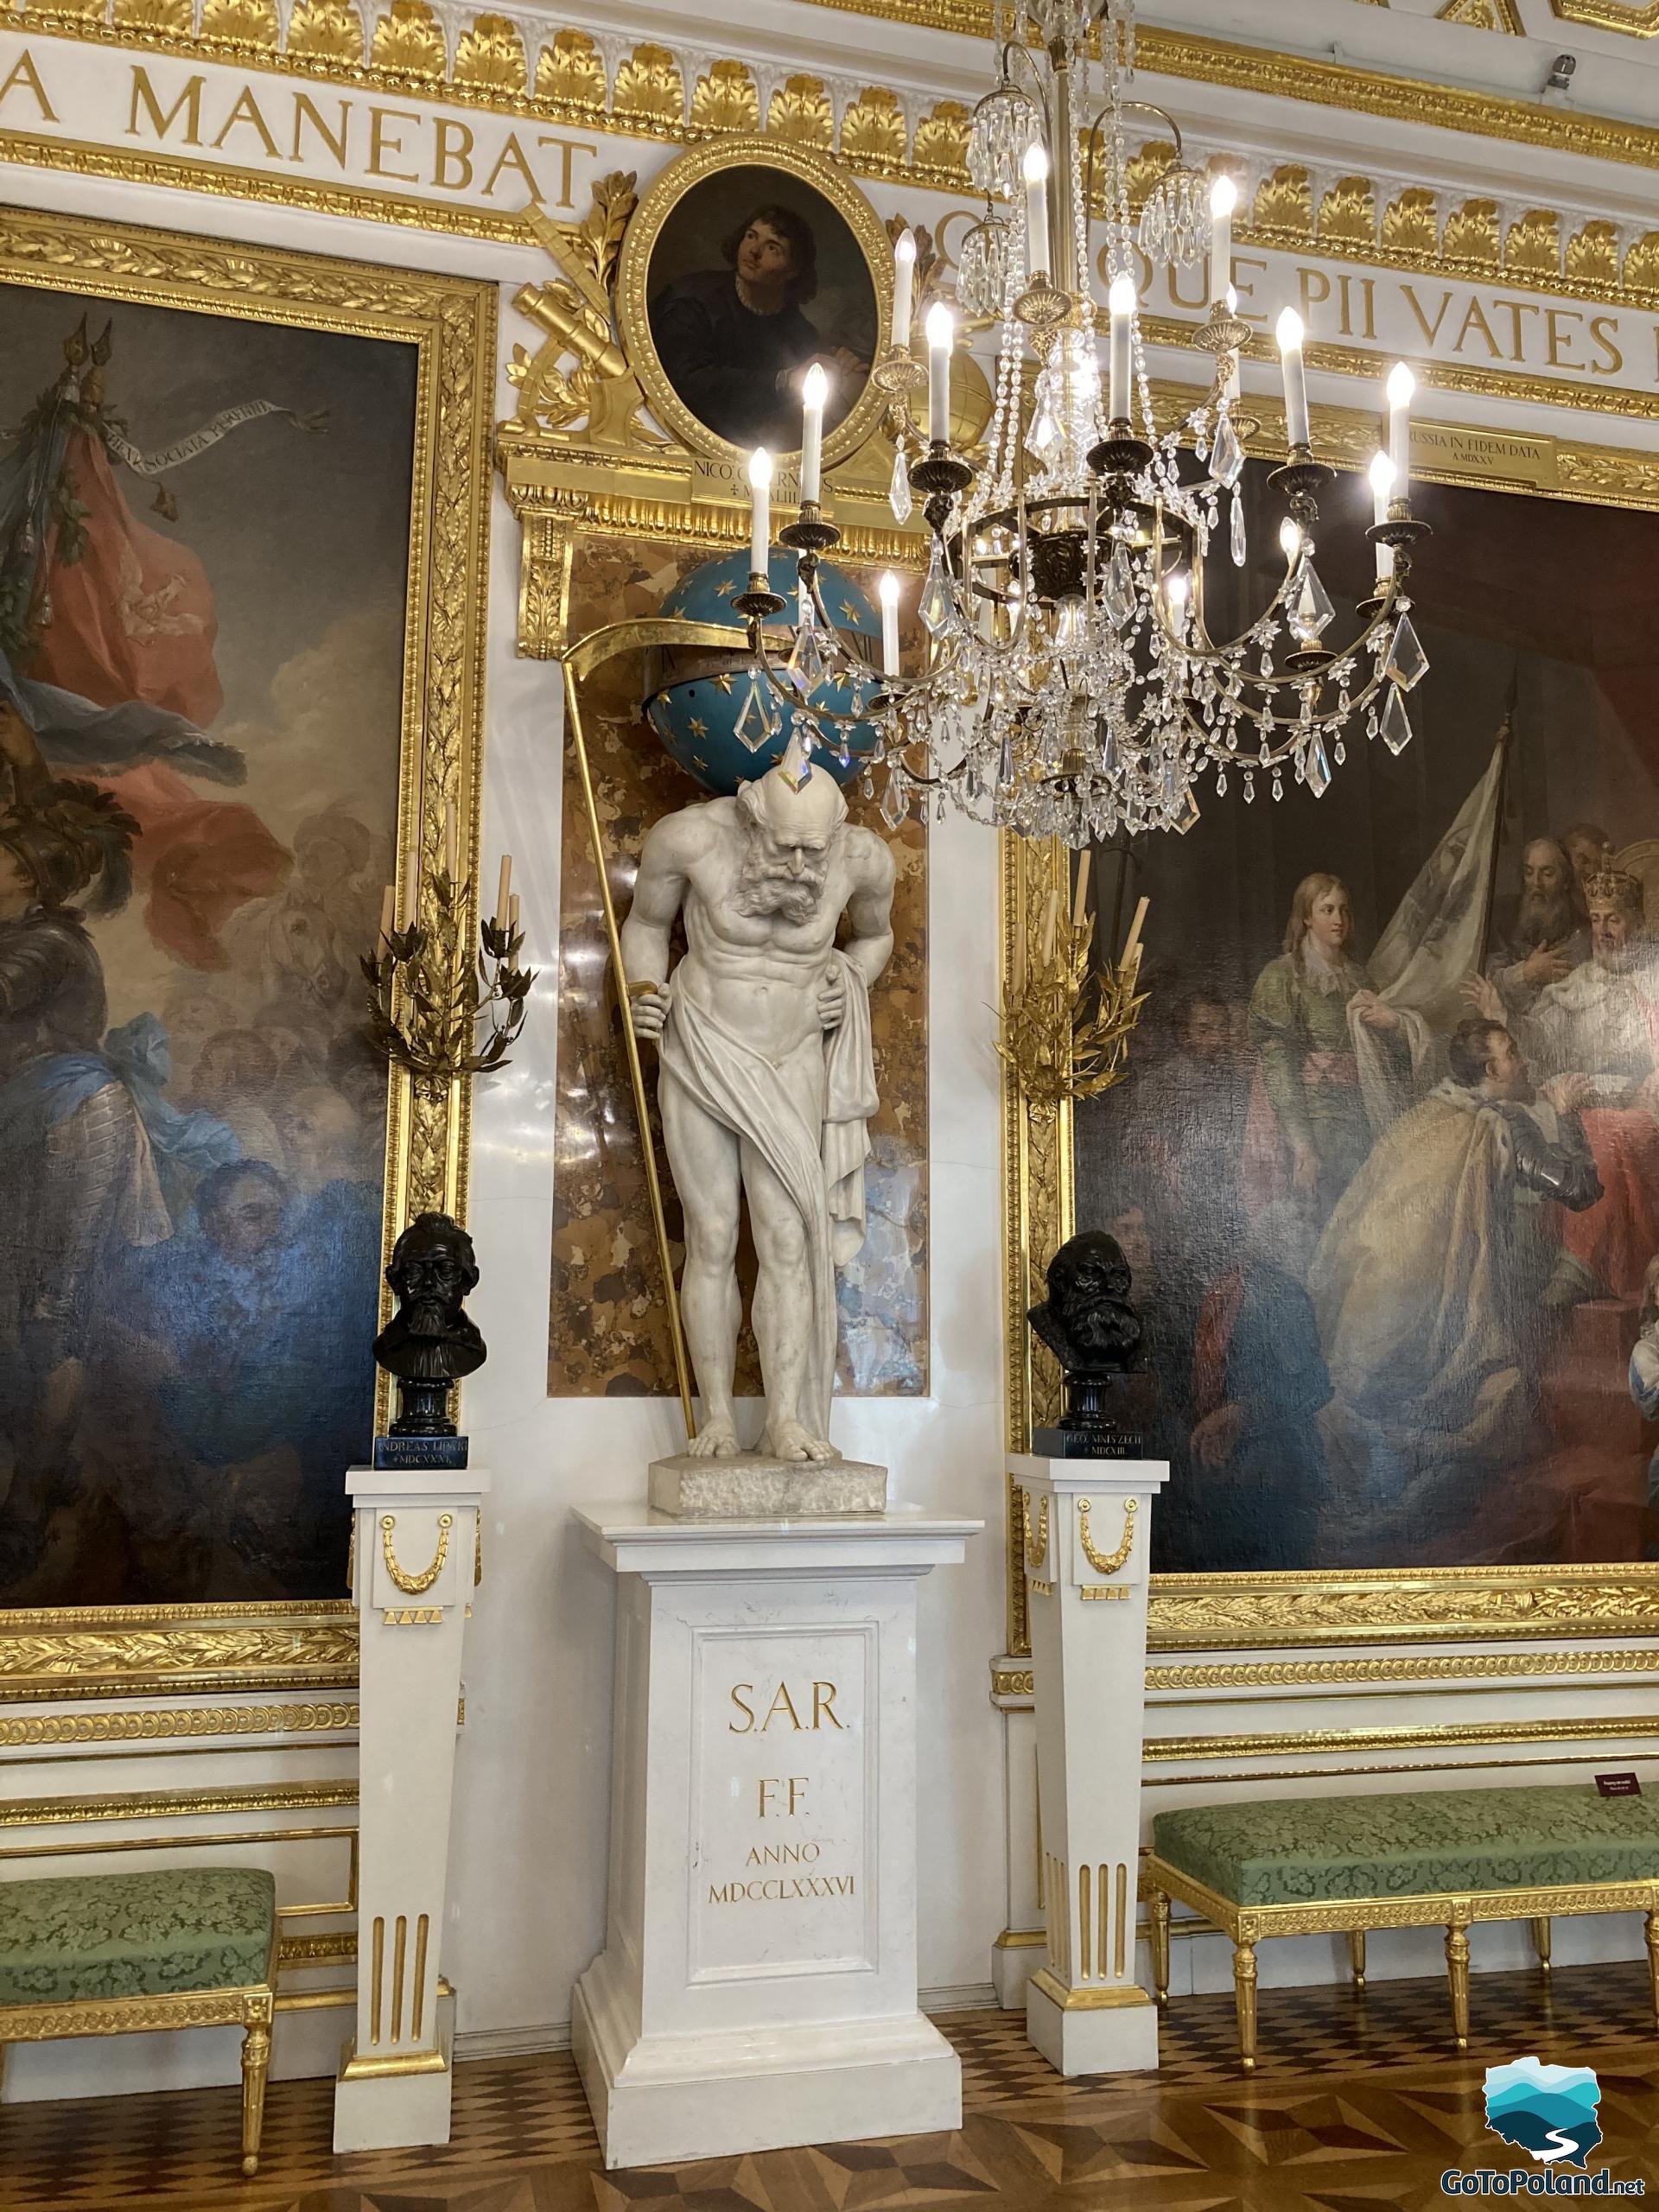 sculpture of a man in the Roman style who carries a huge blue ball on his shoulders, on both sides, next to him are two pedestals with male busts and two large paintings in golden frames